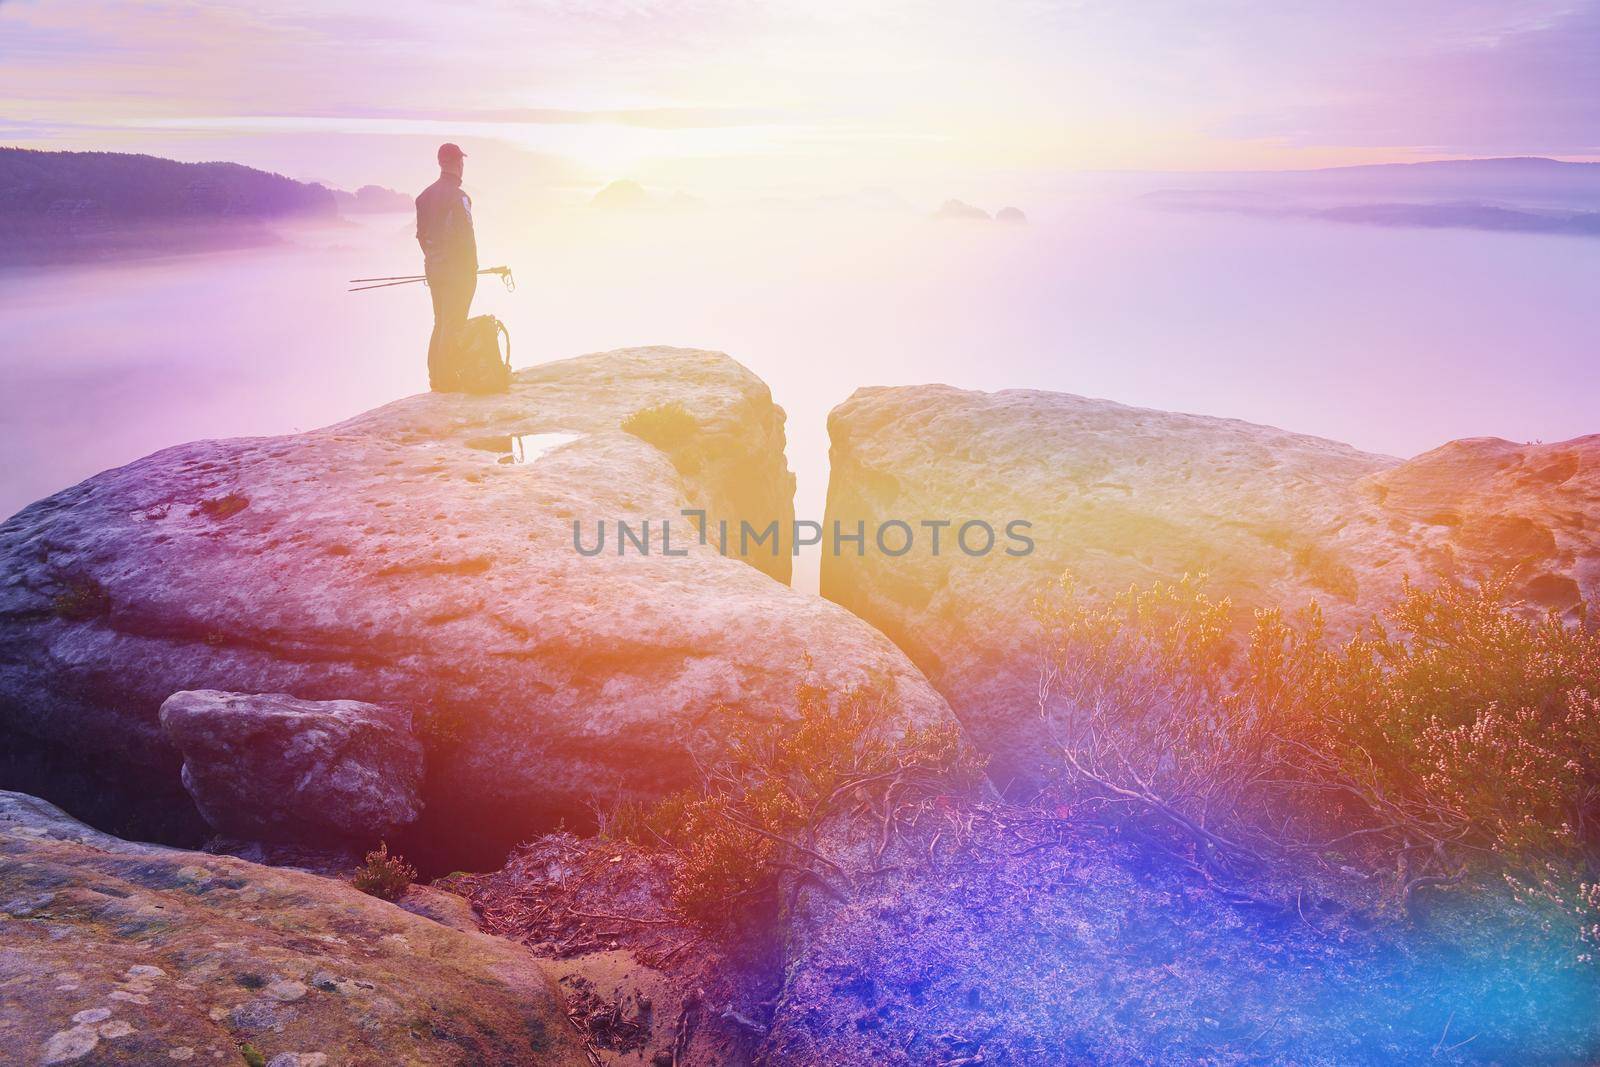 Man with trekking poles on rocky cliff overlooking the misty valley below mountain.  Abstract lighting, colorful flare.